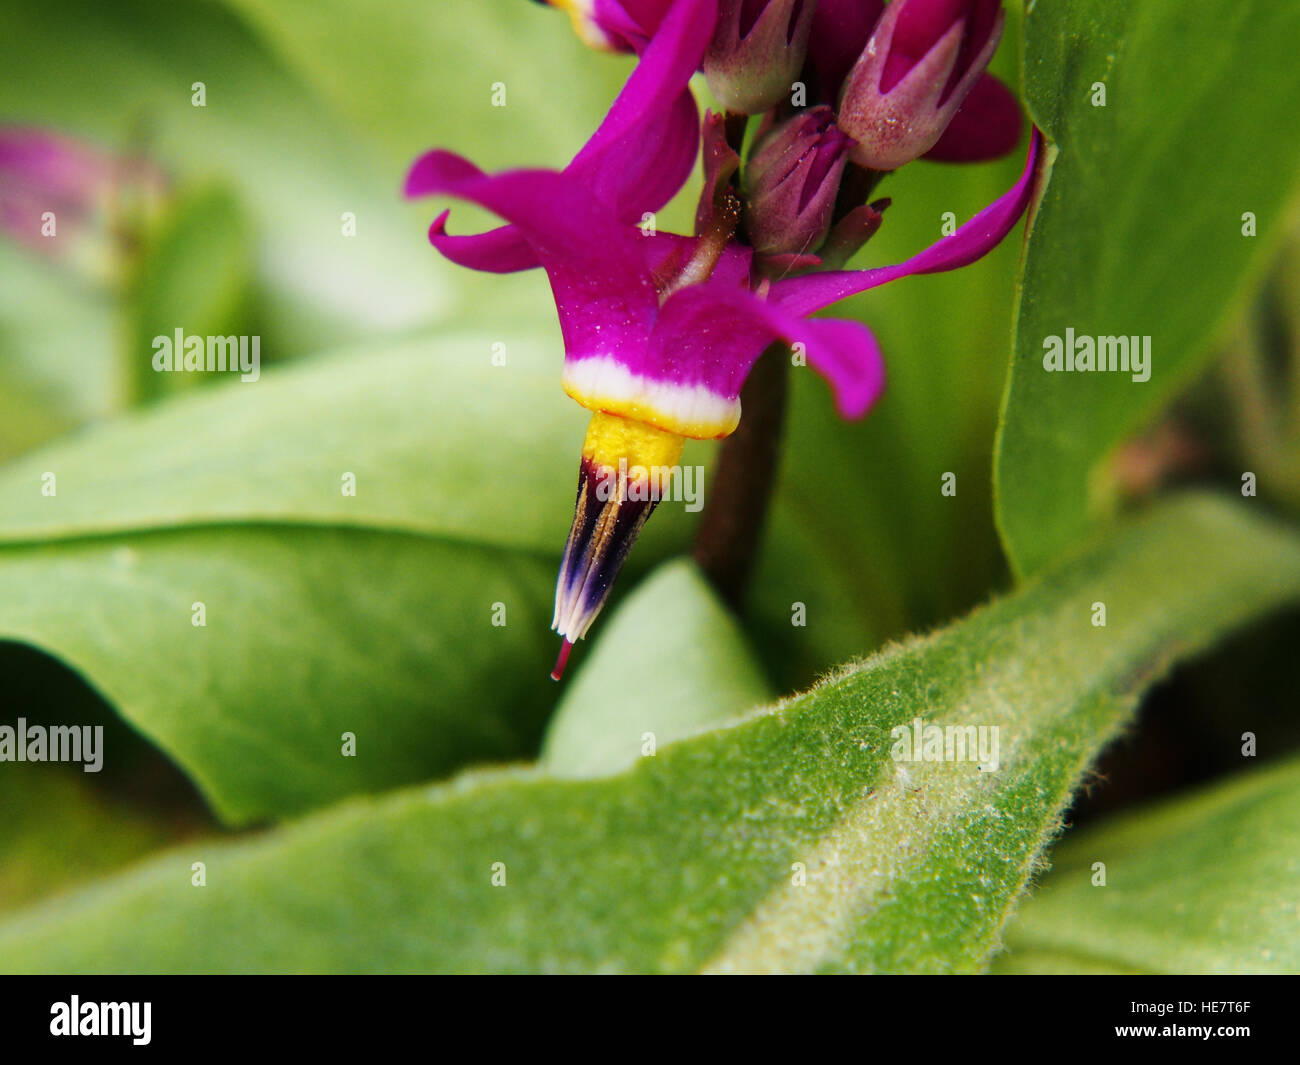 Dodecatheon meadia in full bloom Stock Photo